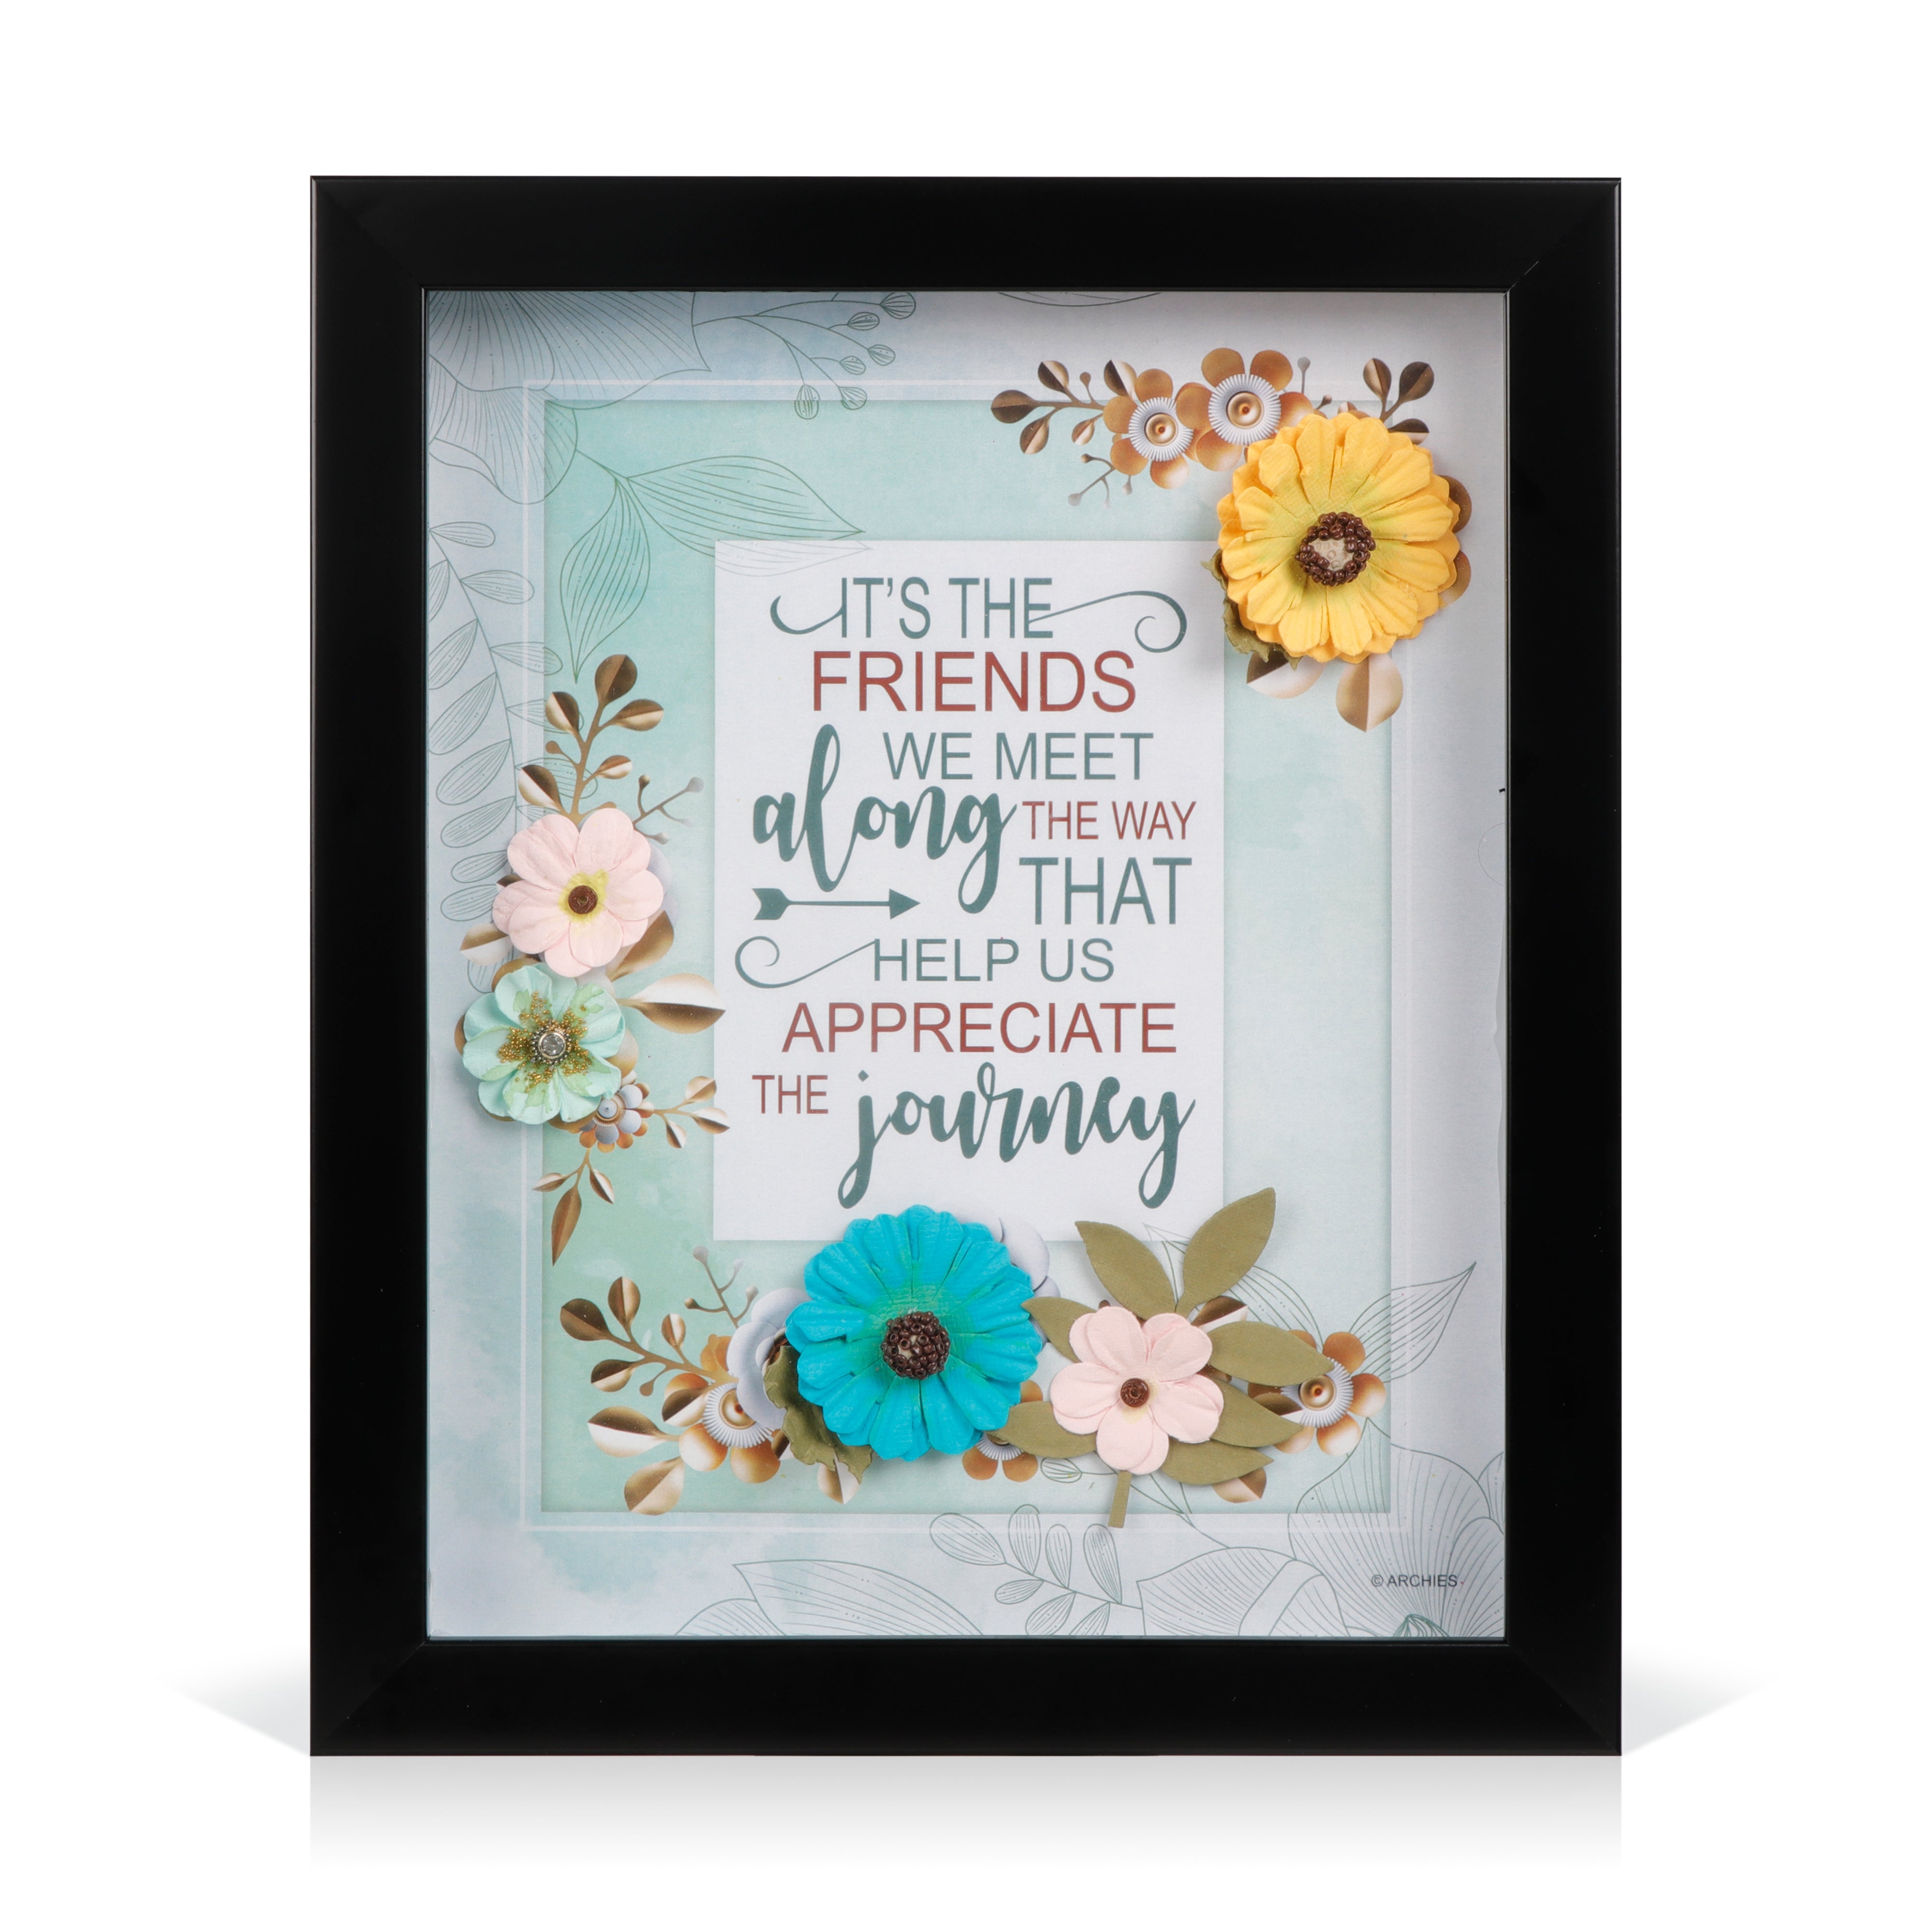 Archies | Archies KEEPSAKE QUOTATION - ITS FRIENDS WE MEET..... For gifting and Home décor